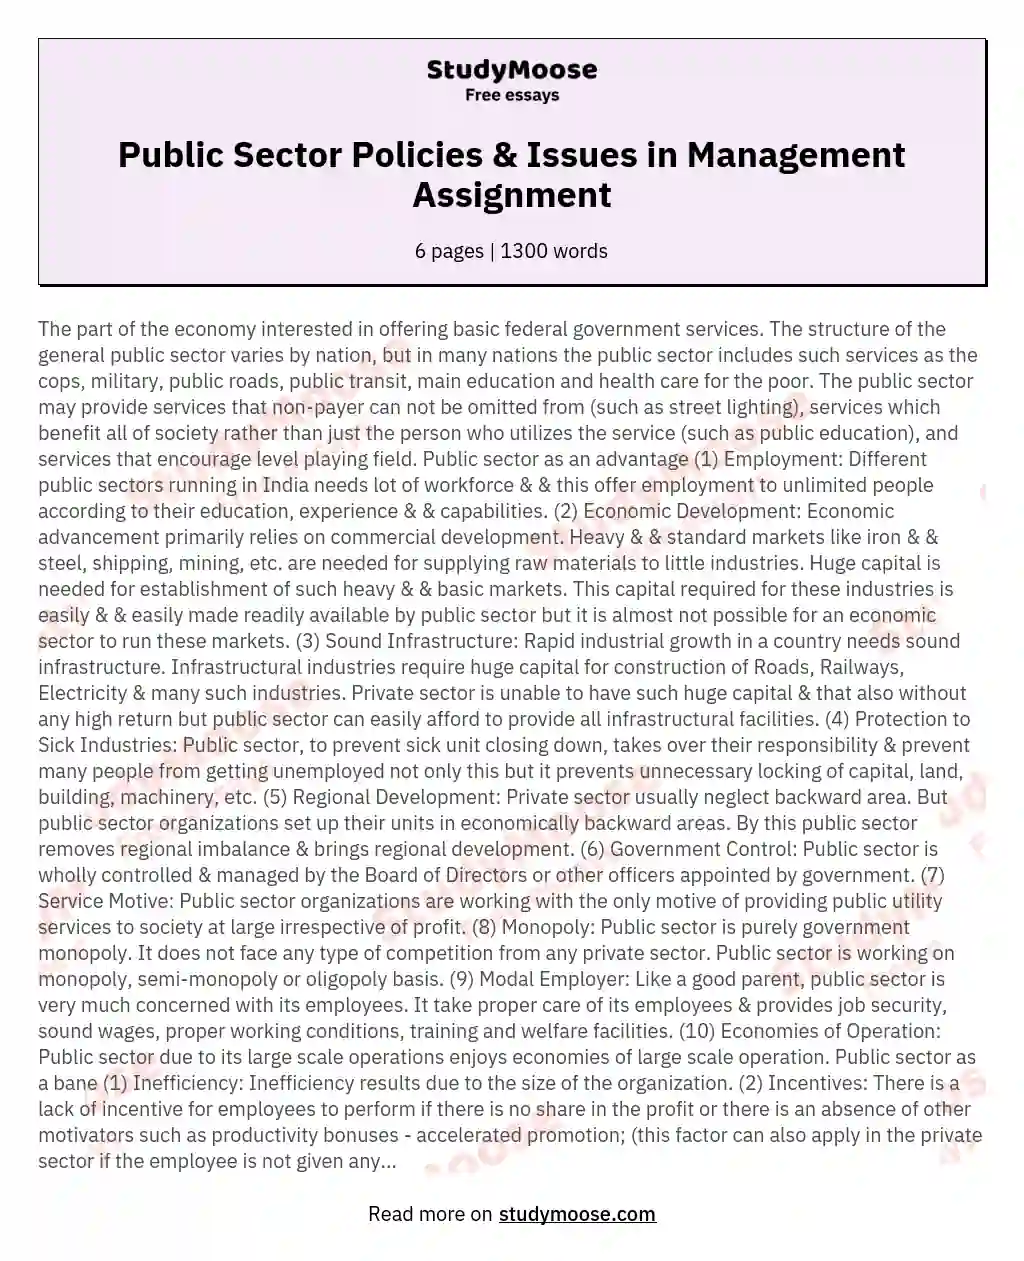 Public Sector Policies &amp; Issues in Management Assignment essay